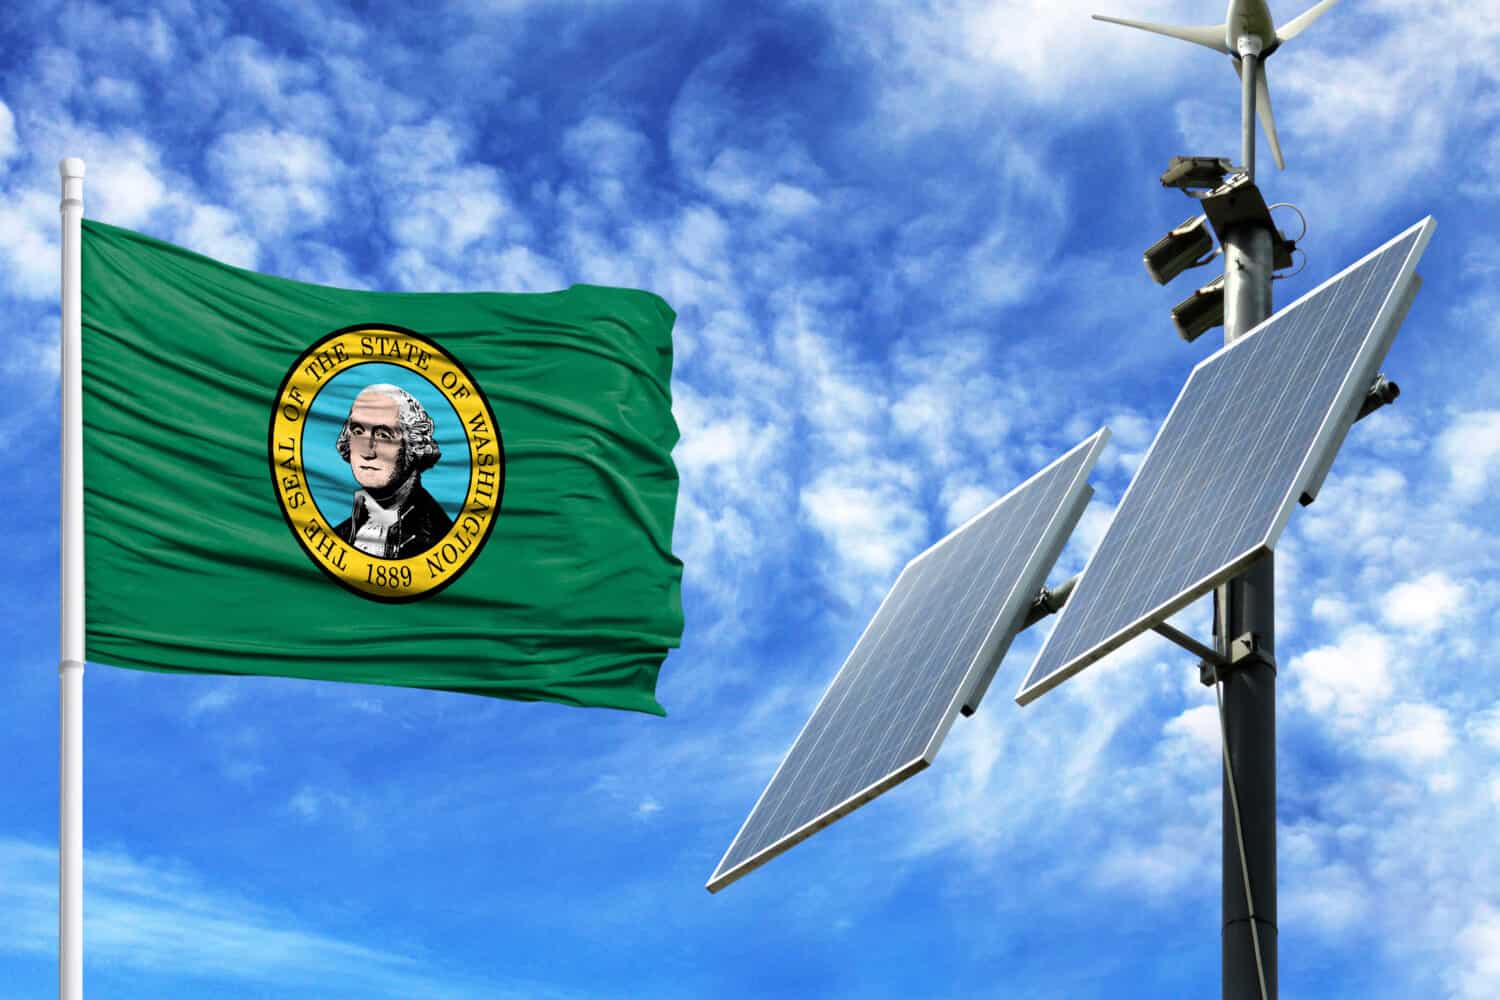 Solar panels on a background of blue sky with a flagpole and the flag State of Washington